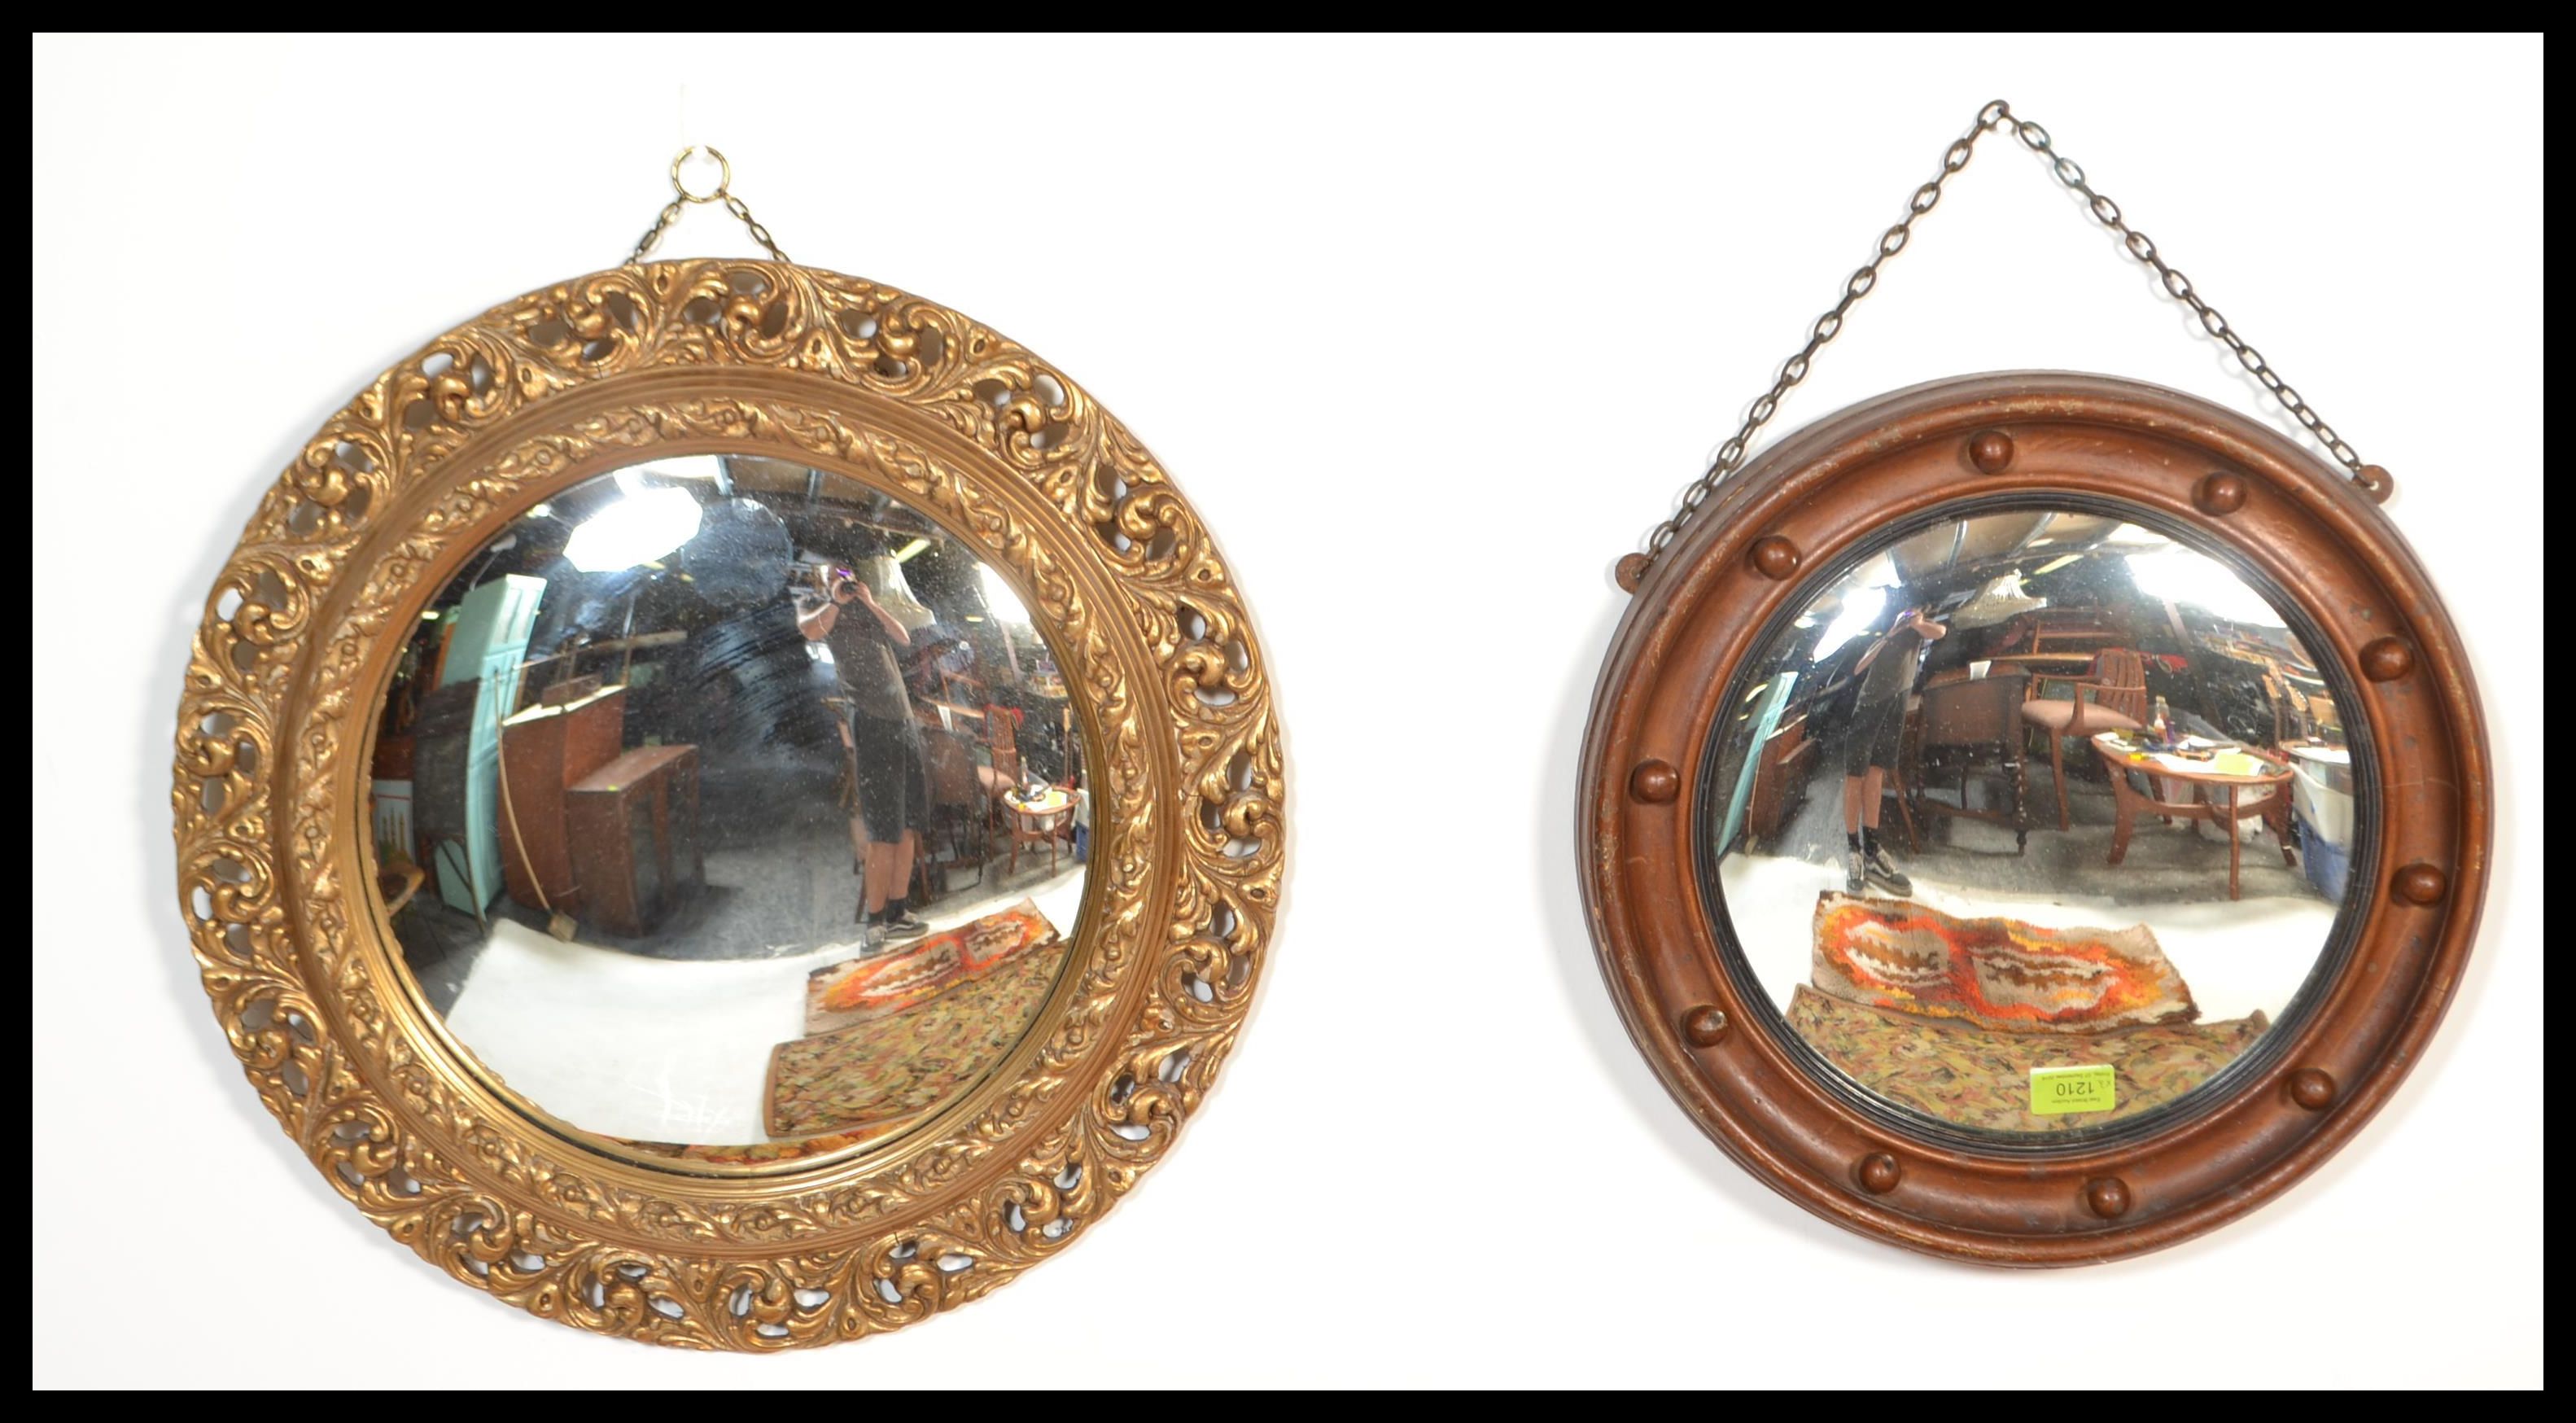 Two vintage 20th century comvex mirrors of circular form. One having a detailed ornate scrolled gilt